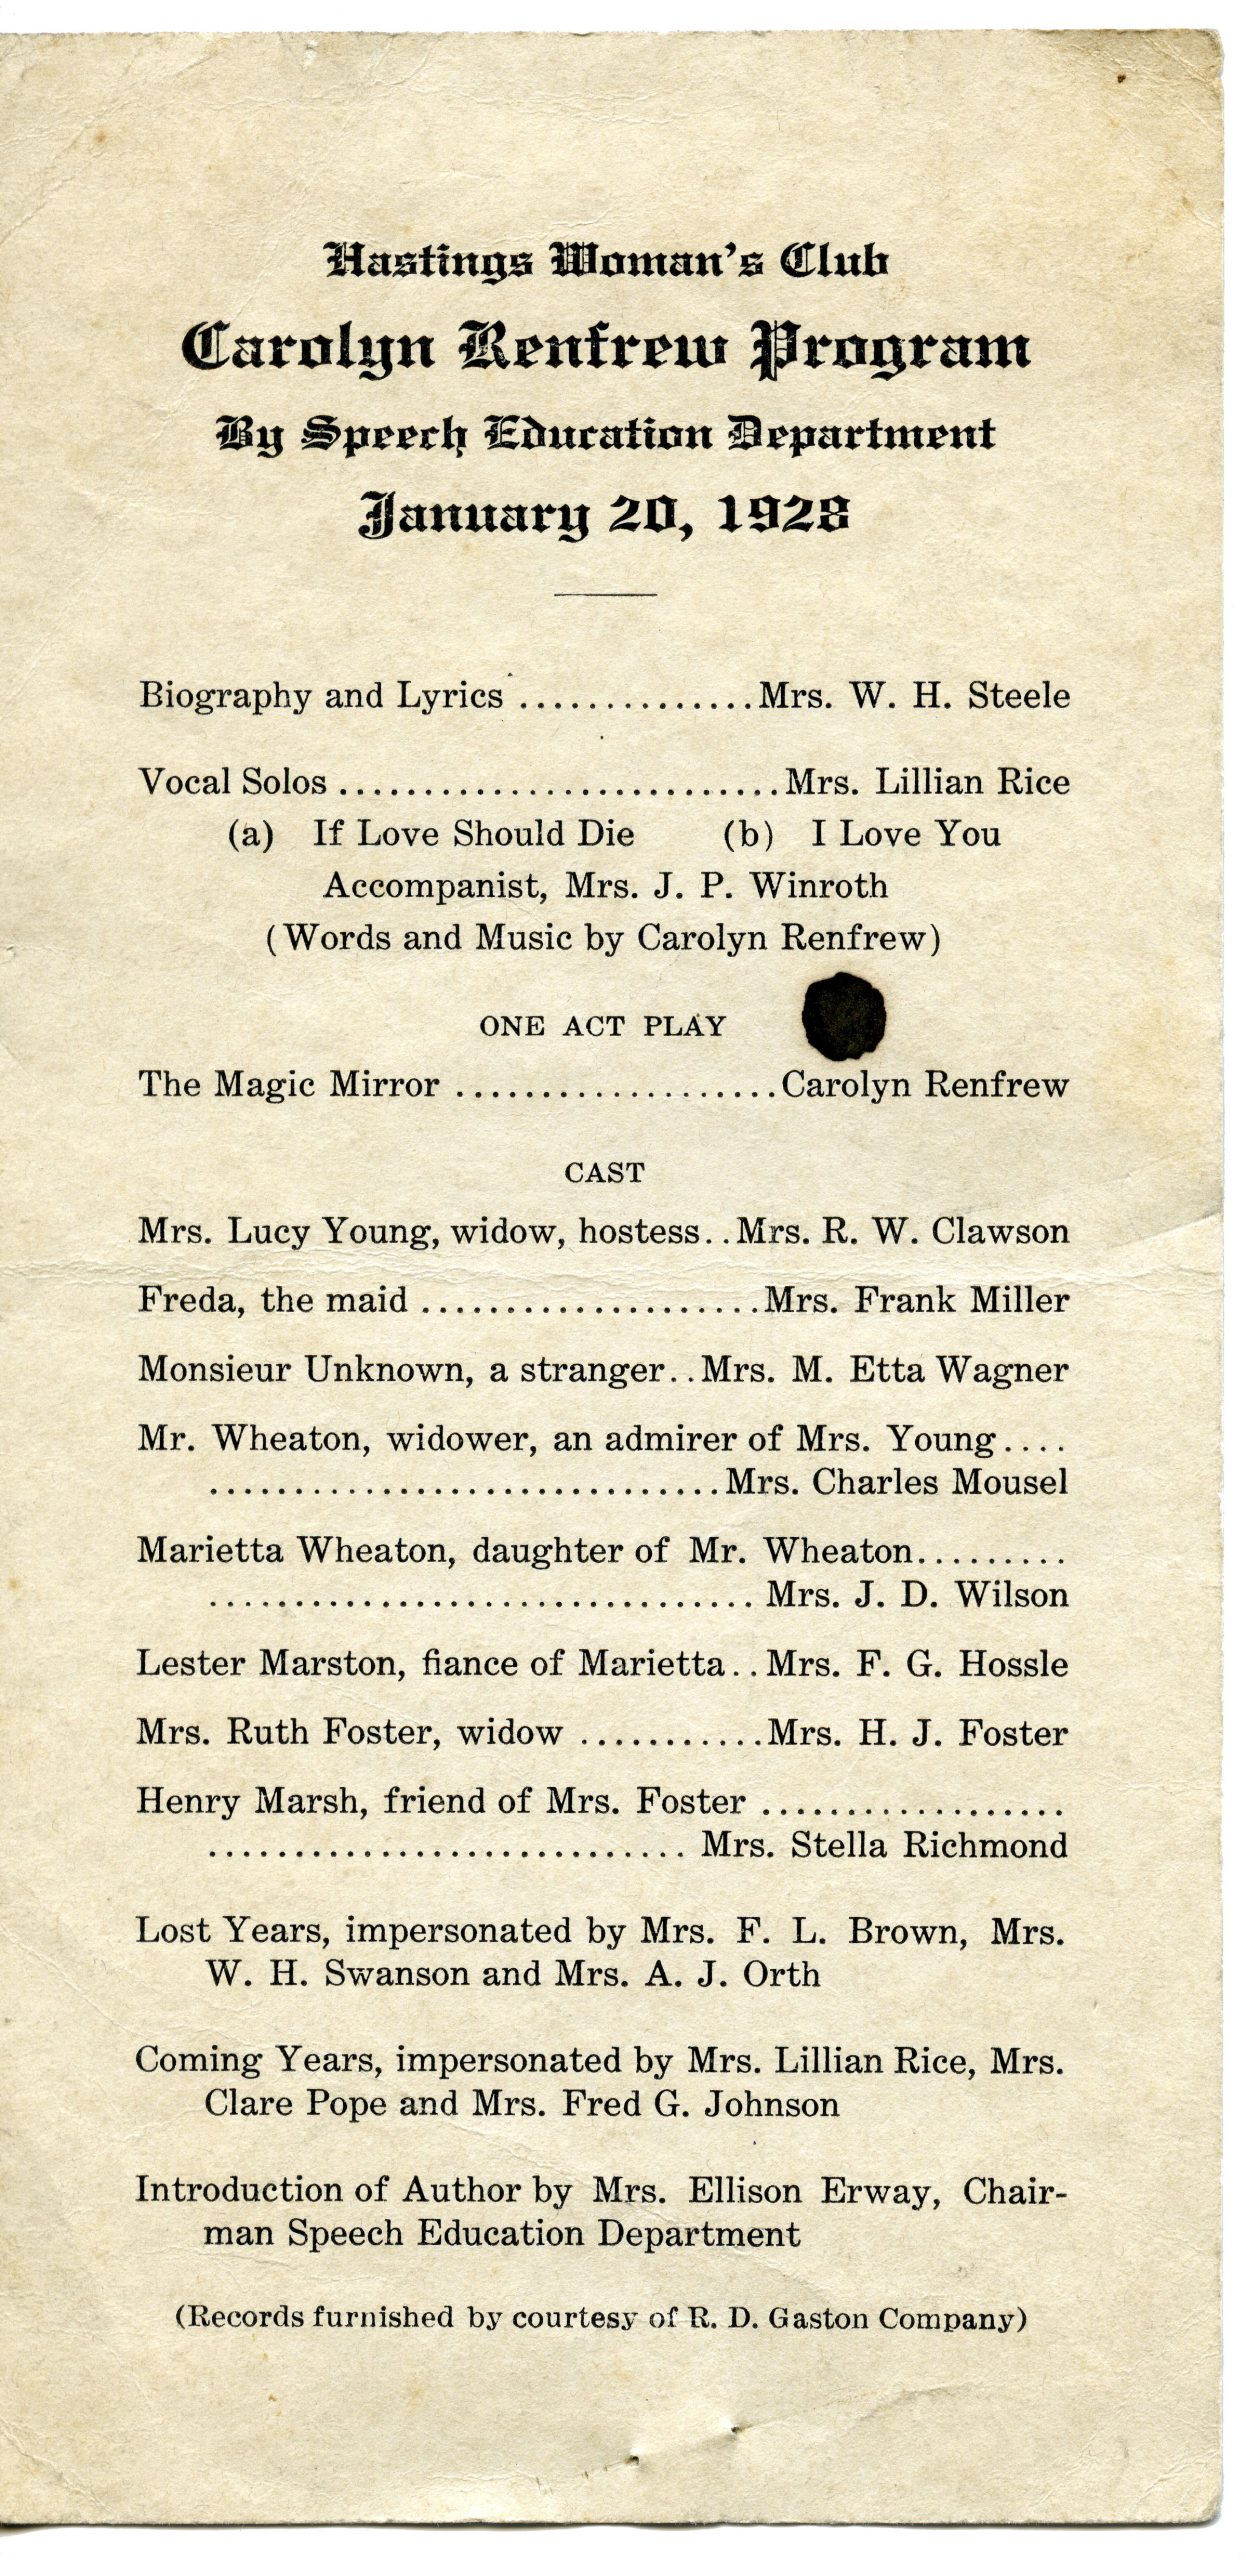 Carolyn Renfrew Program Reads: Hastings Woman's Club Carolyn Renfrew Program By Speech Education Department January 20, 1928 - Biography and Lyrics...Mrs. W.H. Steele Vocal Solos... Mrs. Lillian Rice (a) If Love Should Die (b) I Love You Accompanist, Mrs. J. P. Winroth (Words and Music by Carolyn Renfrew) ONE ACT PLAY The Magic Mirror...Carolyn Renfrew CAST Mrs. Lucy young, widow, hostess...Mrs. R.W. Clawson Freda, the maid...Mrs. Frank Miller Monsieur Unknown, a stranger...Mrs. M. Etta Wagner Mr Wheaton, widower, an admirer of Mrs. Young...Mrs. Charles Mousel Marietta Wheaton, daughter of Mr. Wheaton...Mrs. J.D. Wilson Lester Marston, fiance of Marietta...Mrs. F.G. Hossle Mrs. Ruth Foster, widow...Mrs. H.J. Foster Henry Marsh, friend of Mrs. Foster...Mrs. Stella Richmond Lost Years, impersonated by Mrs. F. L Brown, Mrs. W. H. Swanson and Mrs. A. J. Orth Coming Years, impersonated by Mrs. Lillian Rice, Mrs. Clare Pope and Mrs. Fred G. Johnson Introduction of Author by Mrs. Ellison Erway, Chairman Speech Education Department (Records furnished by courtesy of R.D. Gaston Company)